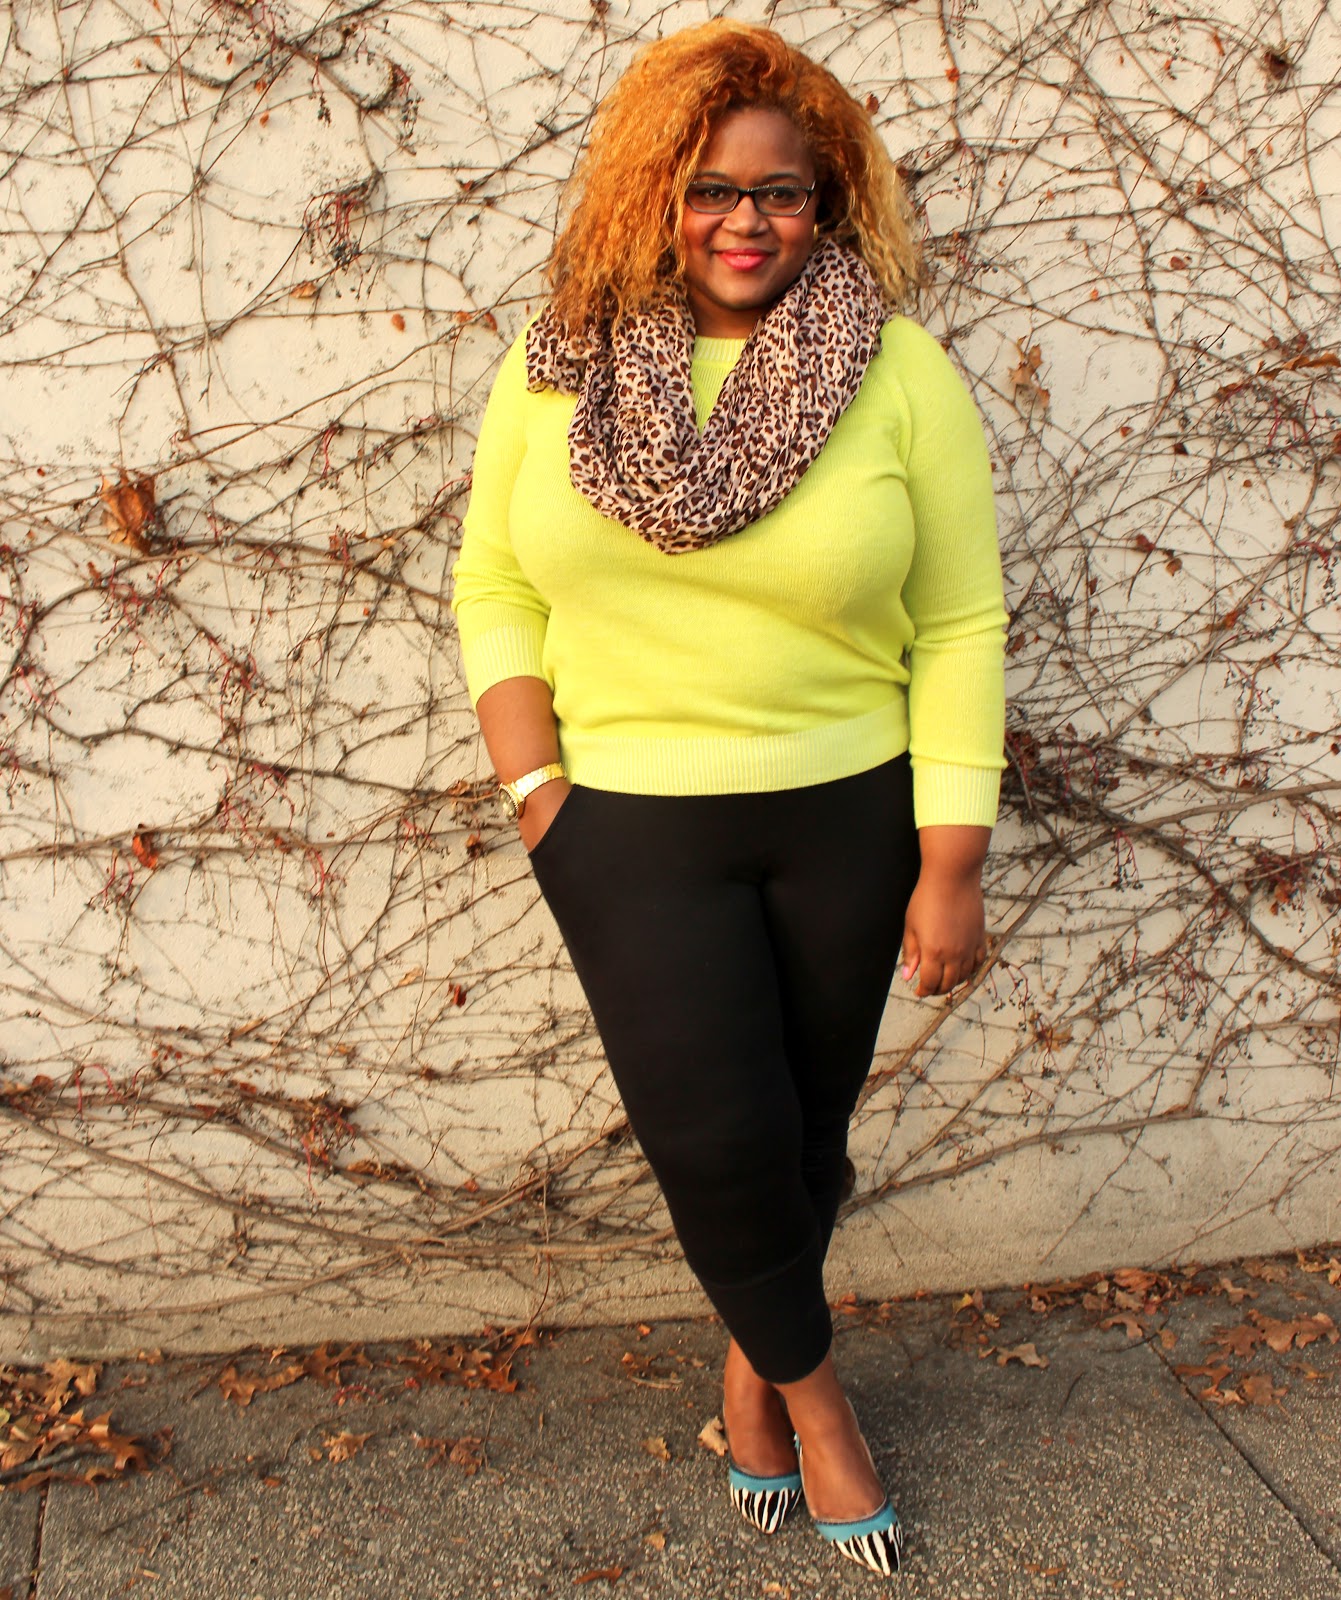 The Style Climber: Neon Sweater